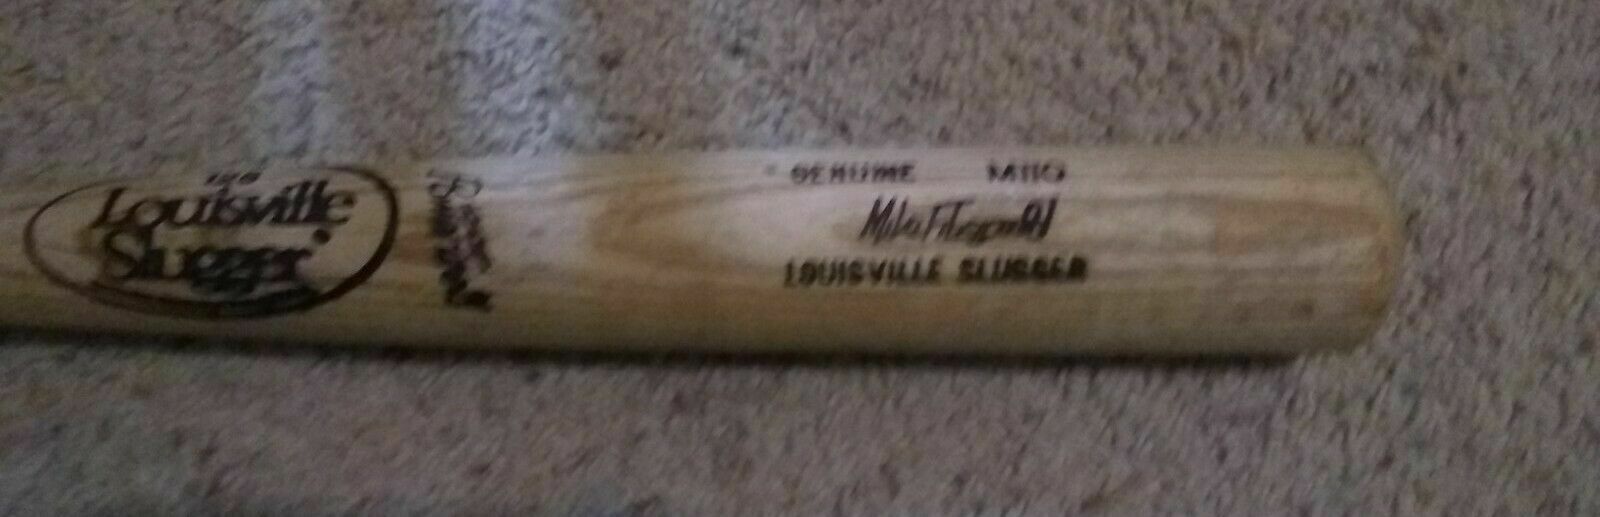 Mike Fitzgerald Game Used Bat 1980's Montreal Expos Cracked Louisville Slugger